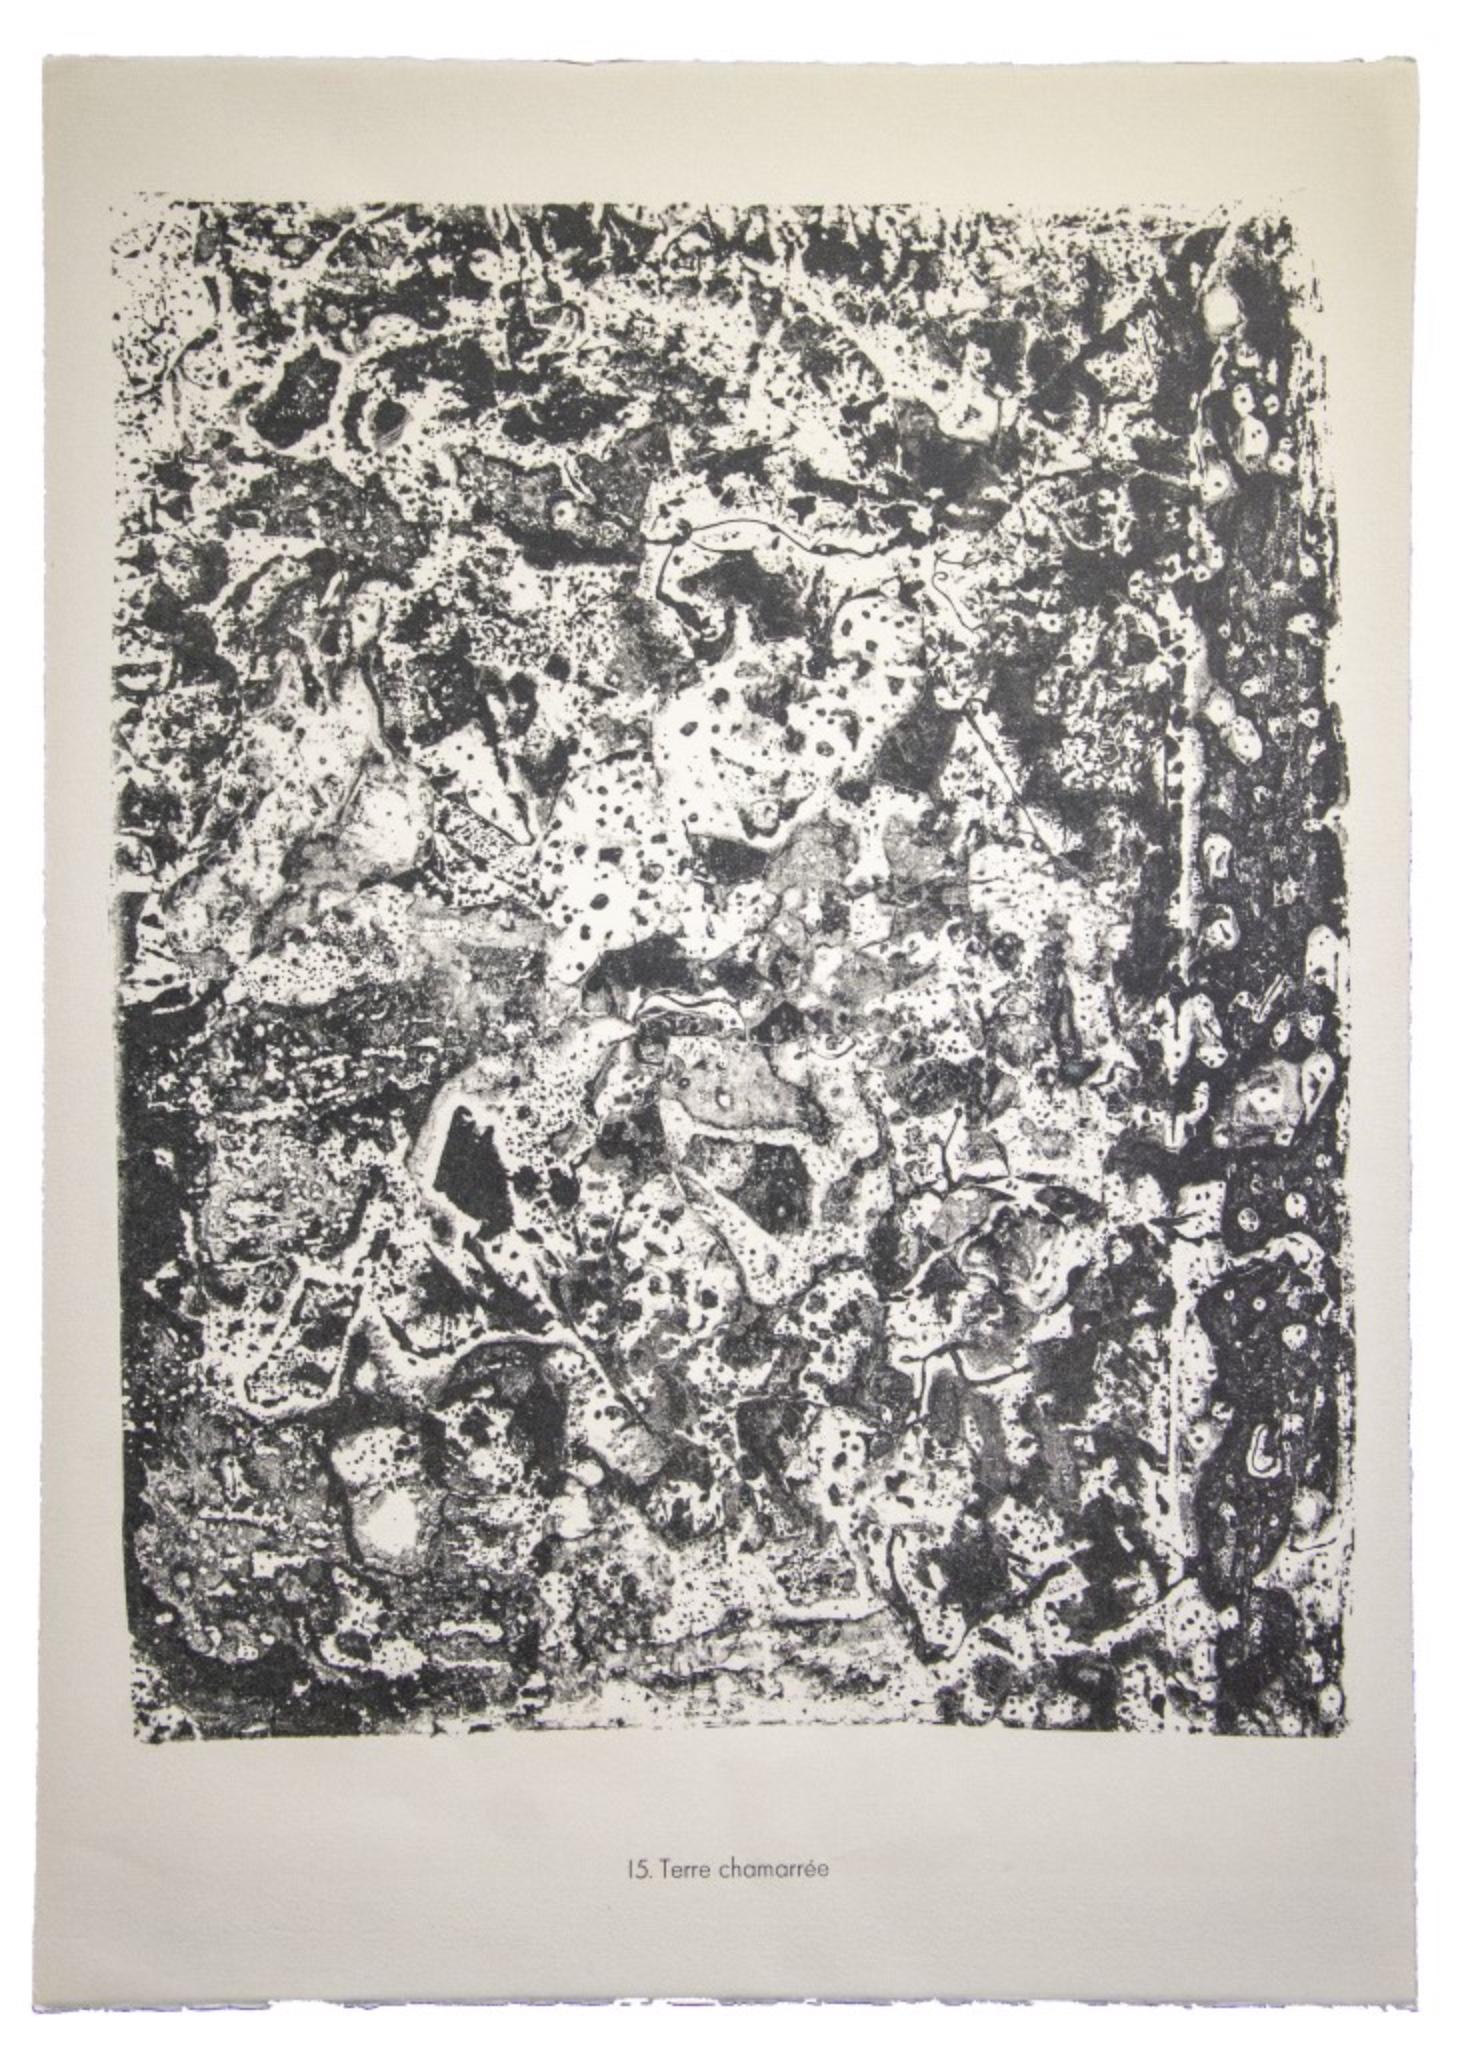 Terre Chamarree - Original Lithograph by Jean Dubuffet - 1959